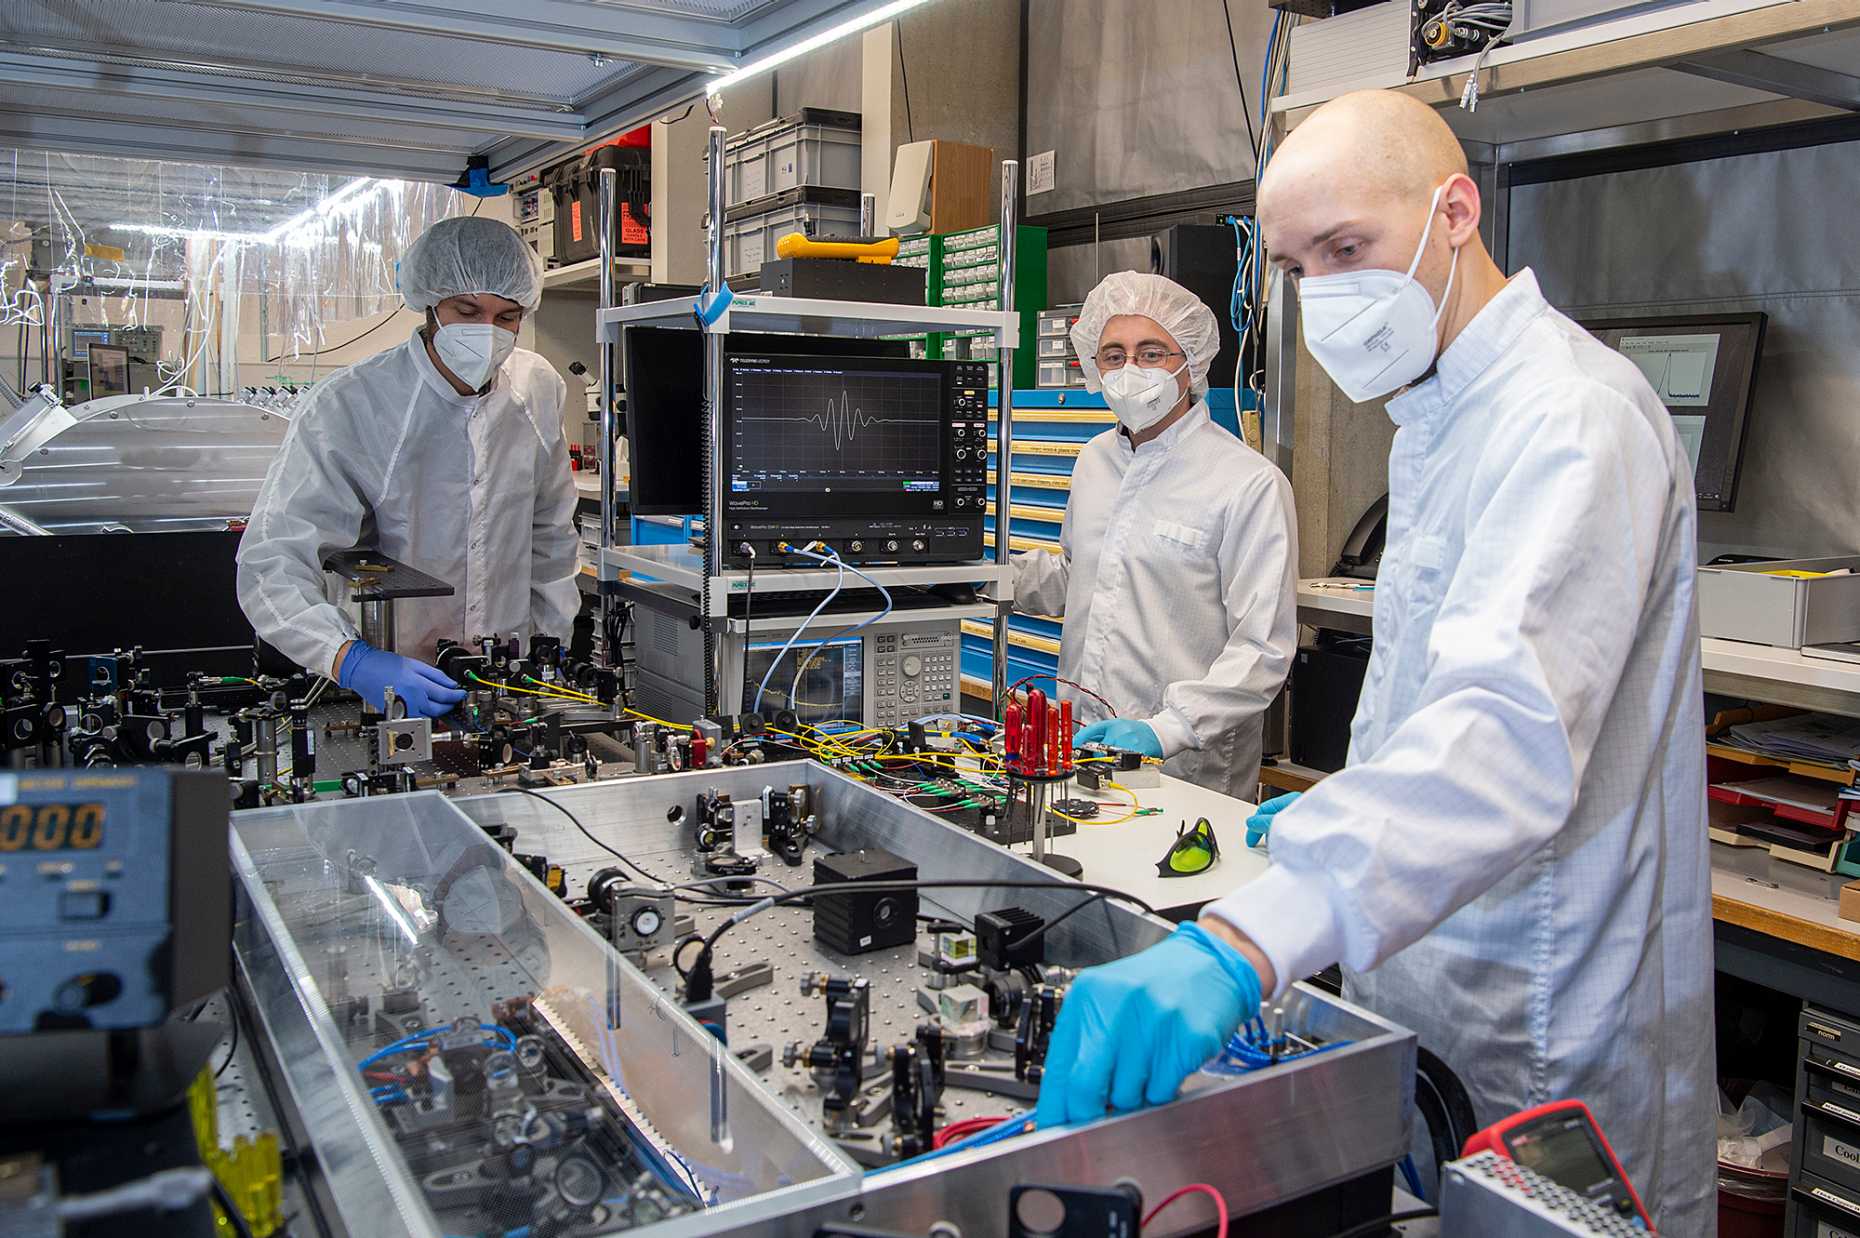 Team members Benjamin Willenberg, Justinas Pupeikis, and Christopher Phillips working with the dual-comb laser at the Ultrafast Laser Physics Lab (Image: ETH Zürich/D-PHYS/Heidi Hostettler)